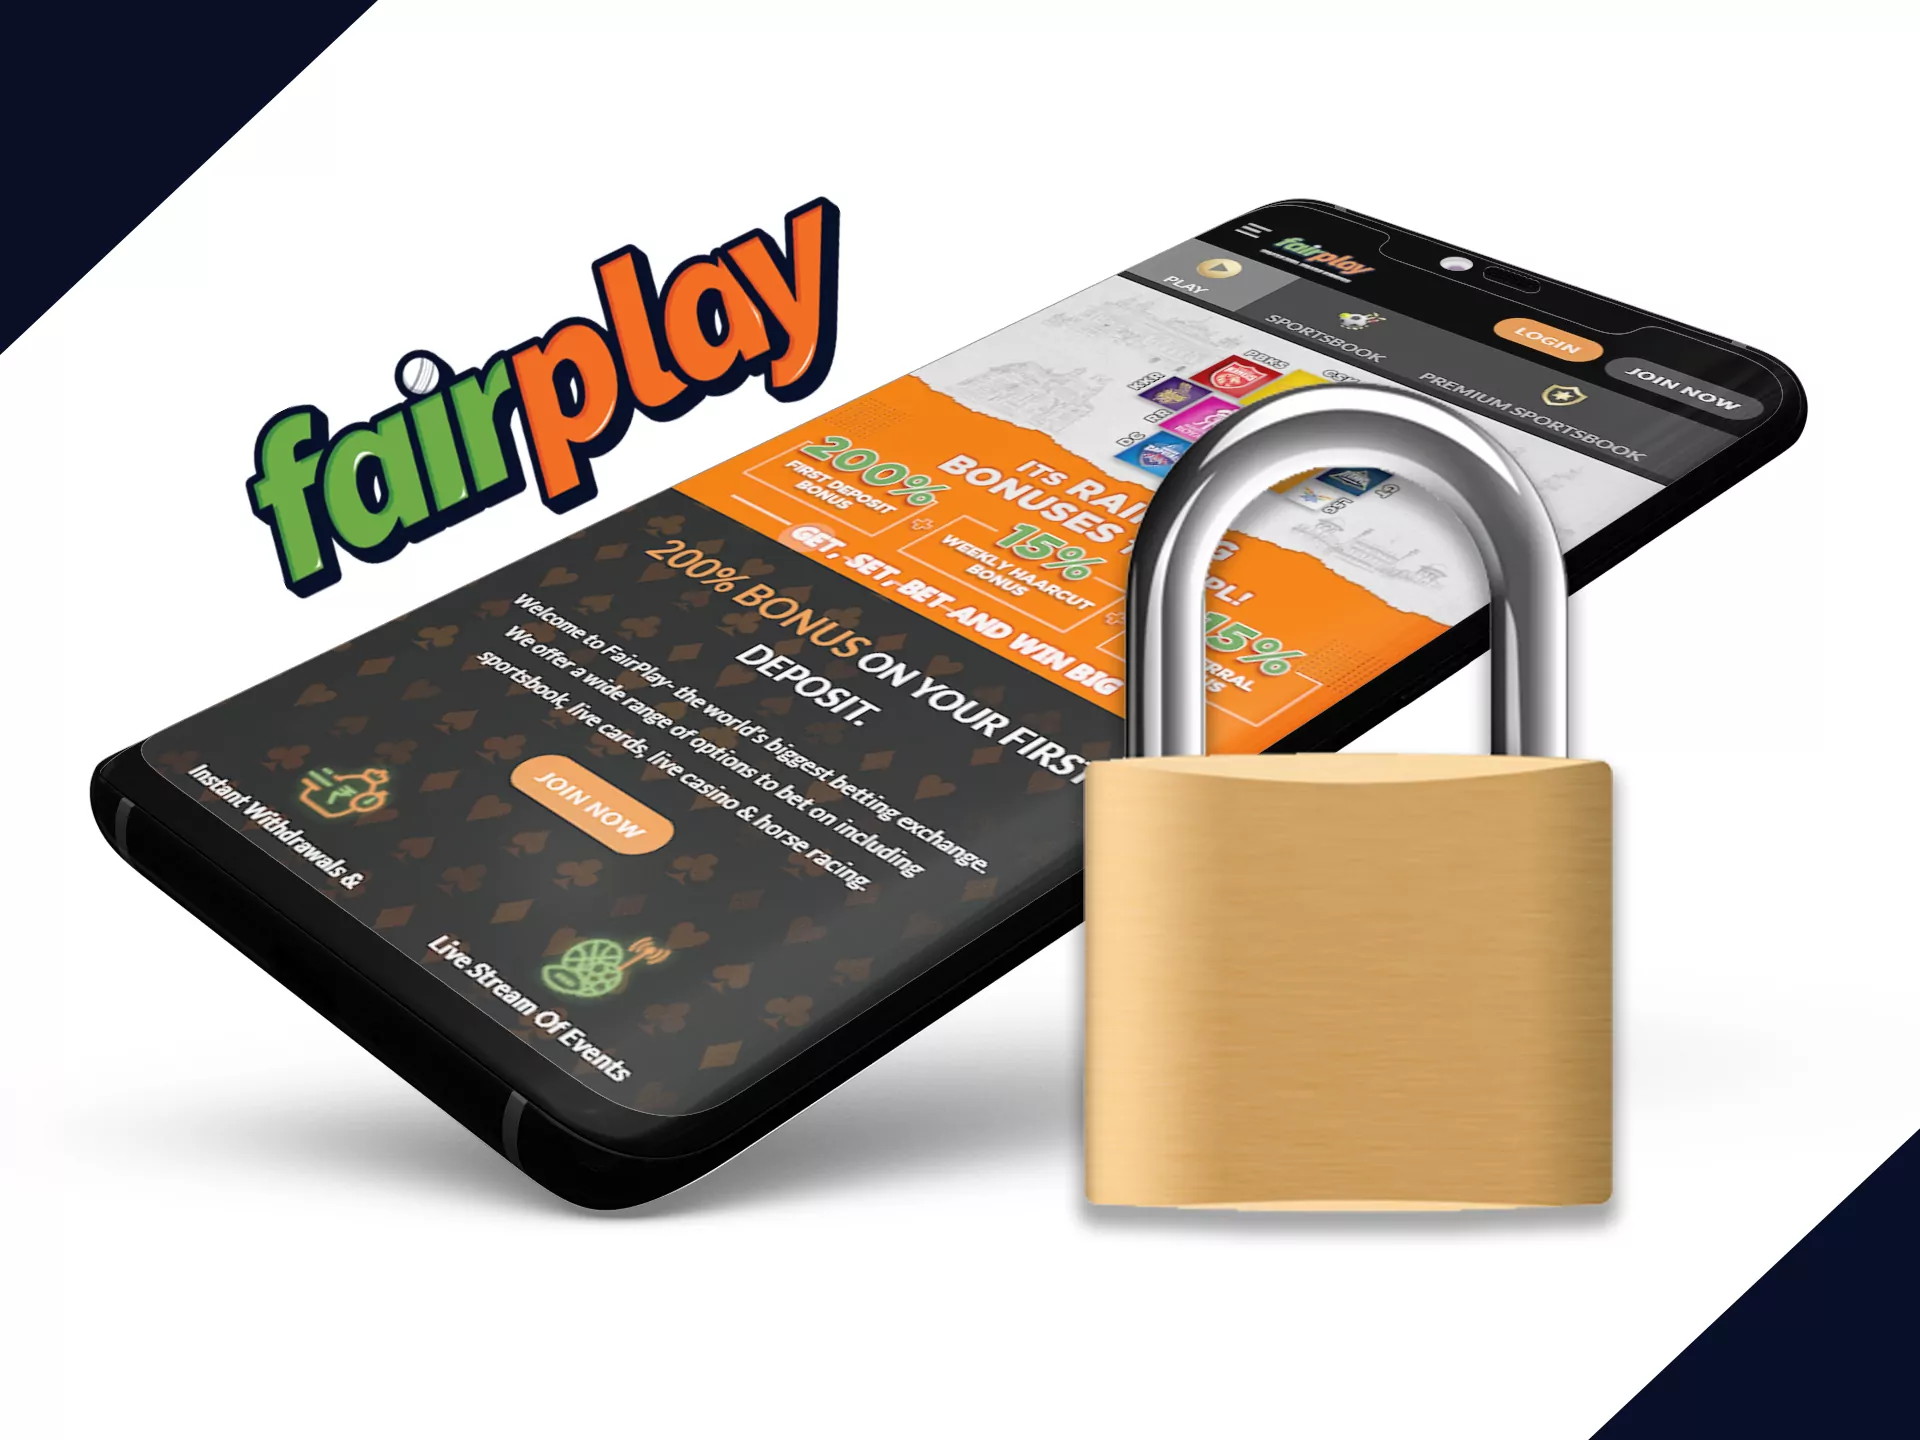 Change security settings for start betting at Fairplay mobile app.